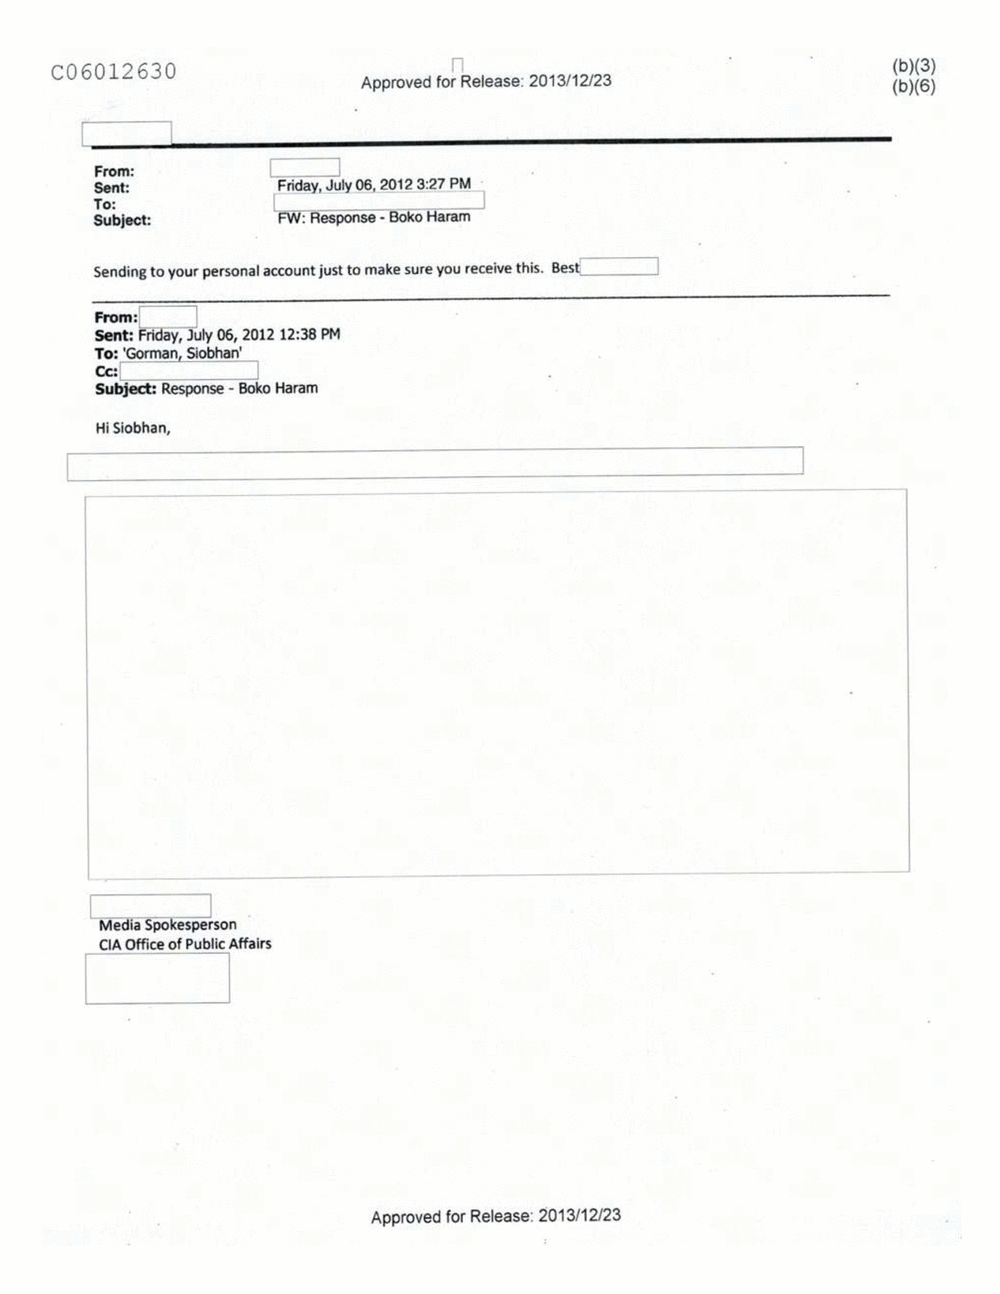 Page 188 from Email Correspondence Between Reporters and CIA Flacks